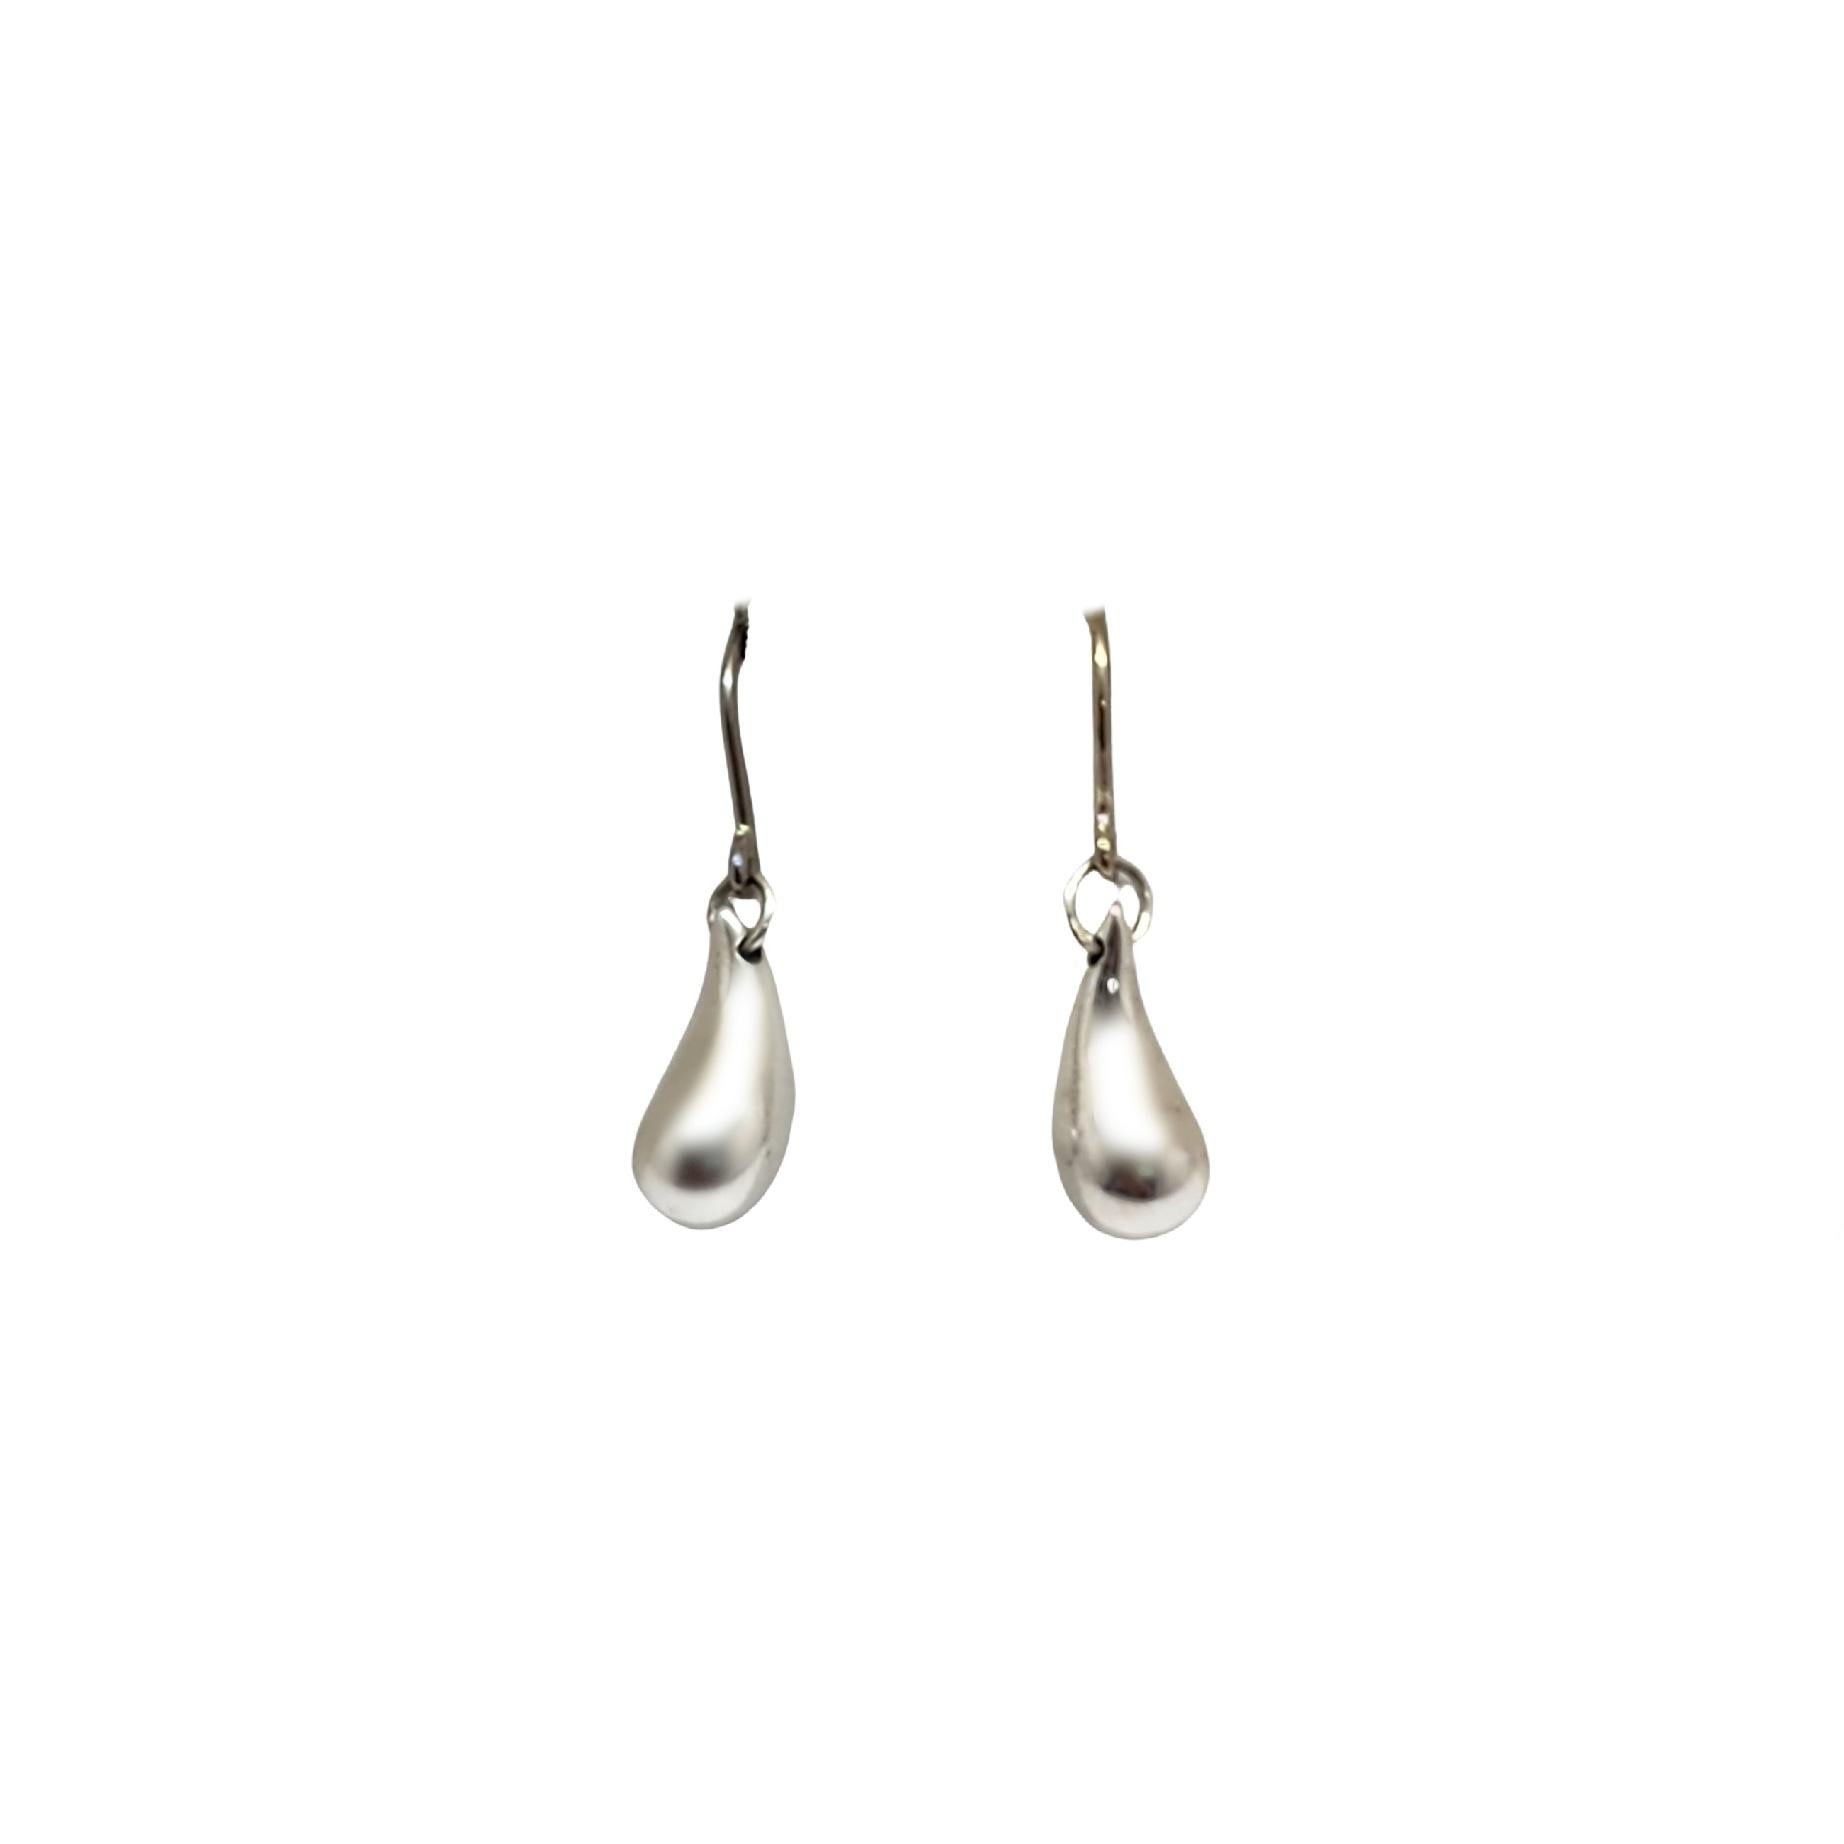 Tiffany & Co sterling silver teardrop dangle earrings by Elsa Peretti.

Authentic Tiffany earrings in Elsa Peretti's signature teardrop design, a timeless classic. Tiffany box and pouch are not included.

Measures approx 1